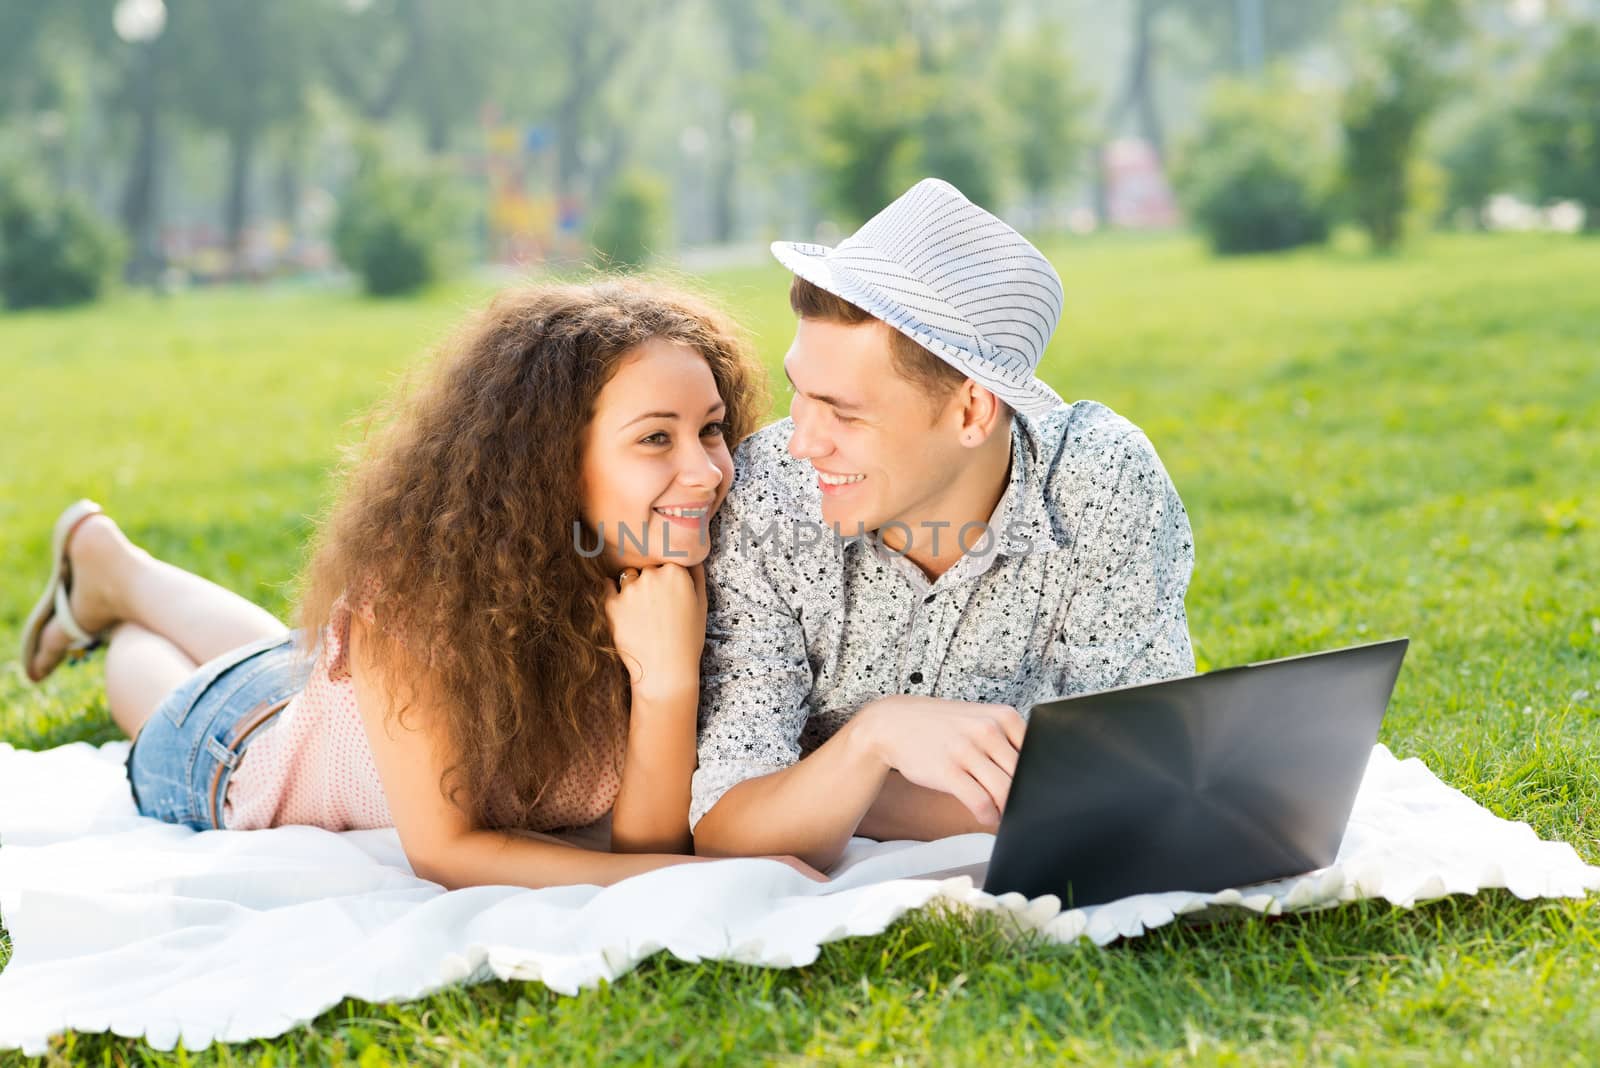 couple lying together in a park, working together on a laptop